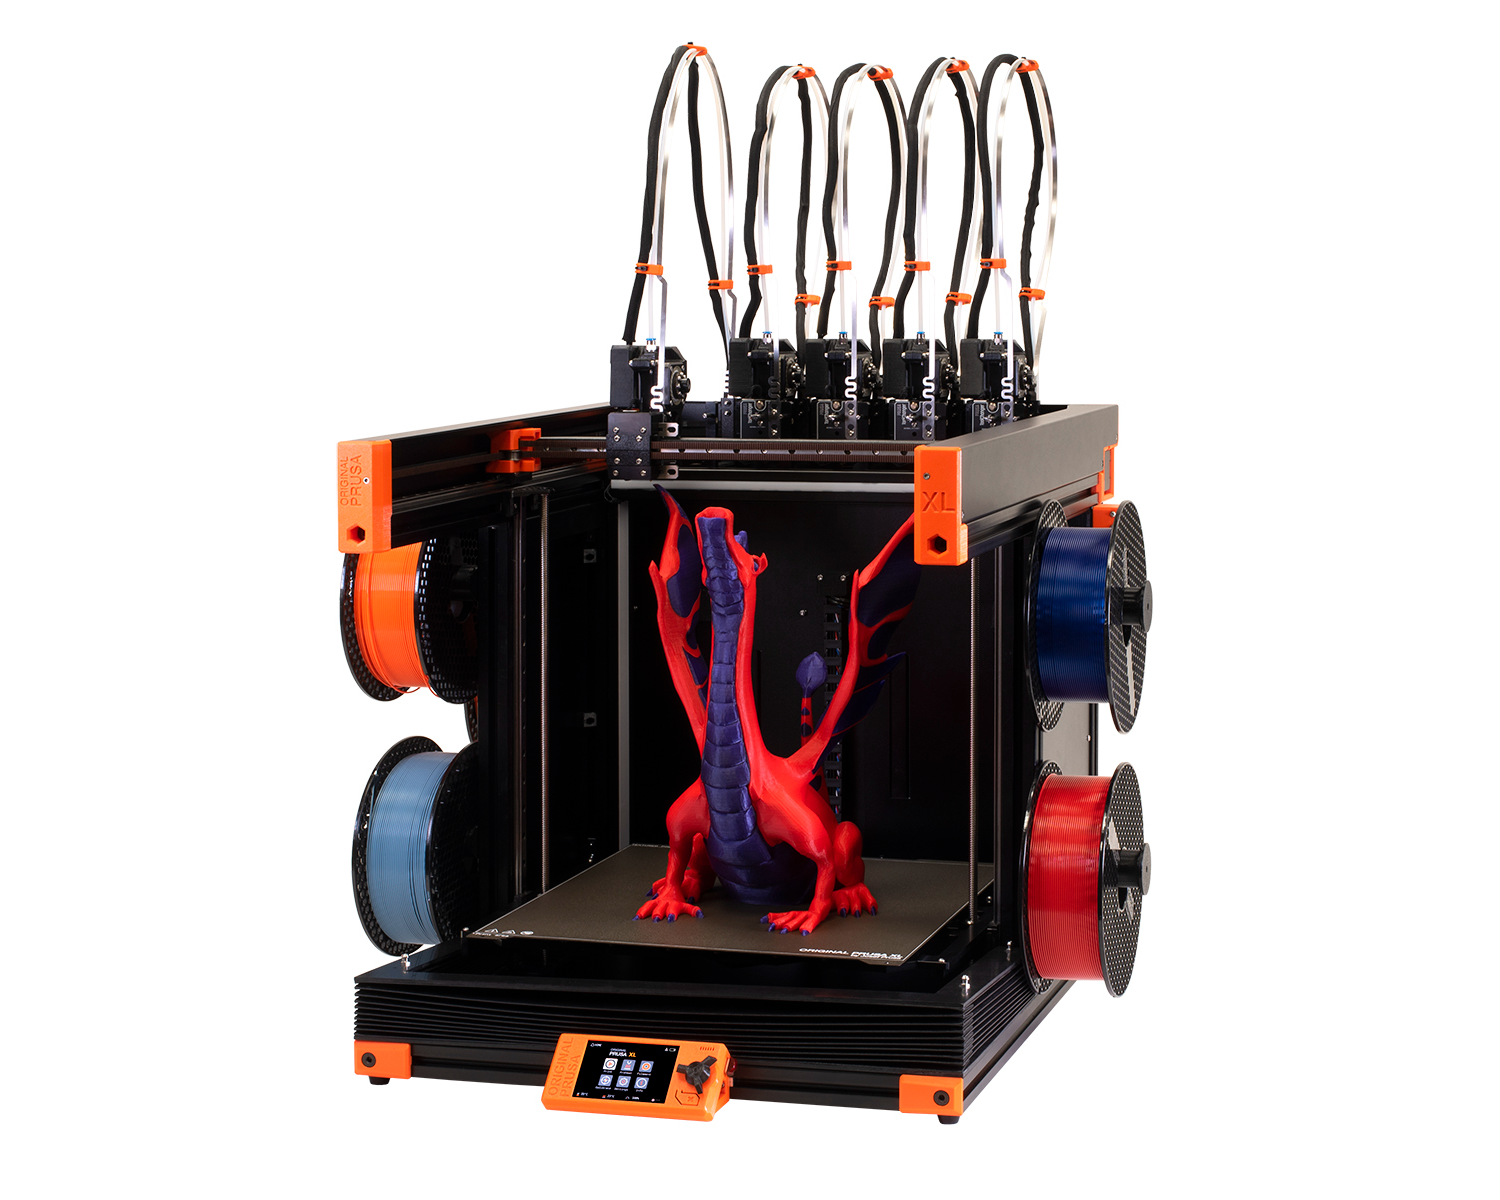 aflevering voor de hand liggend knoflook Prusa debuts its large-format toolchanger system, the XL 3D printer -  technical specifications and pricing - 3D Printing Industry